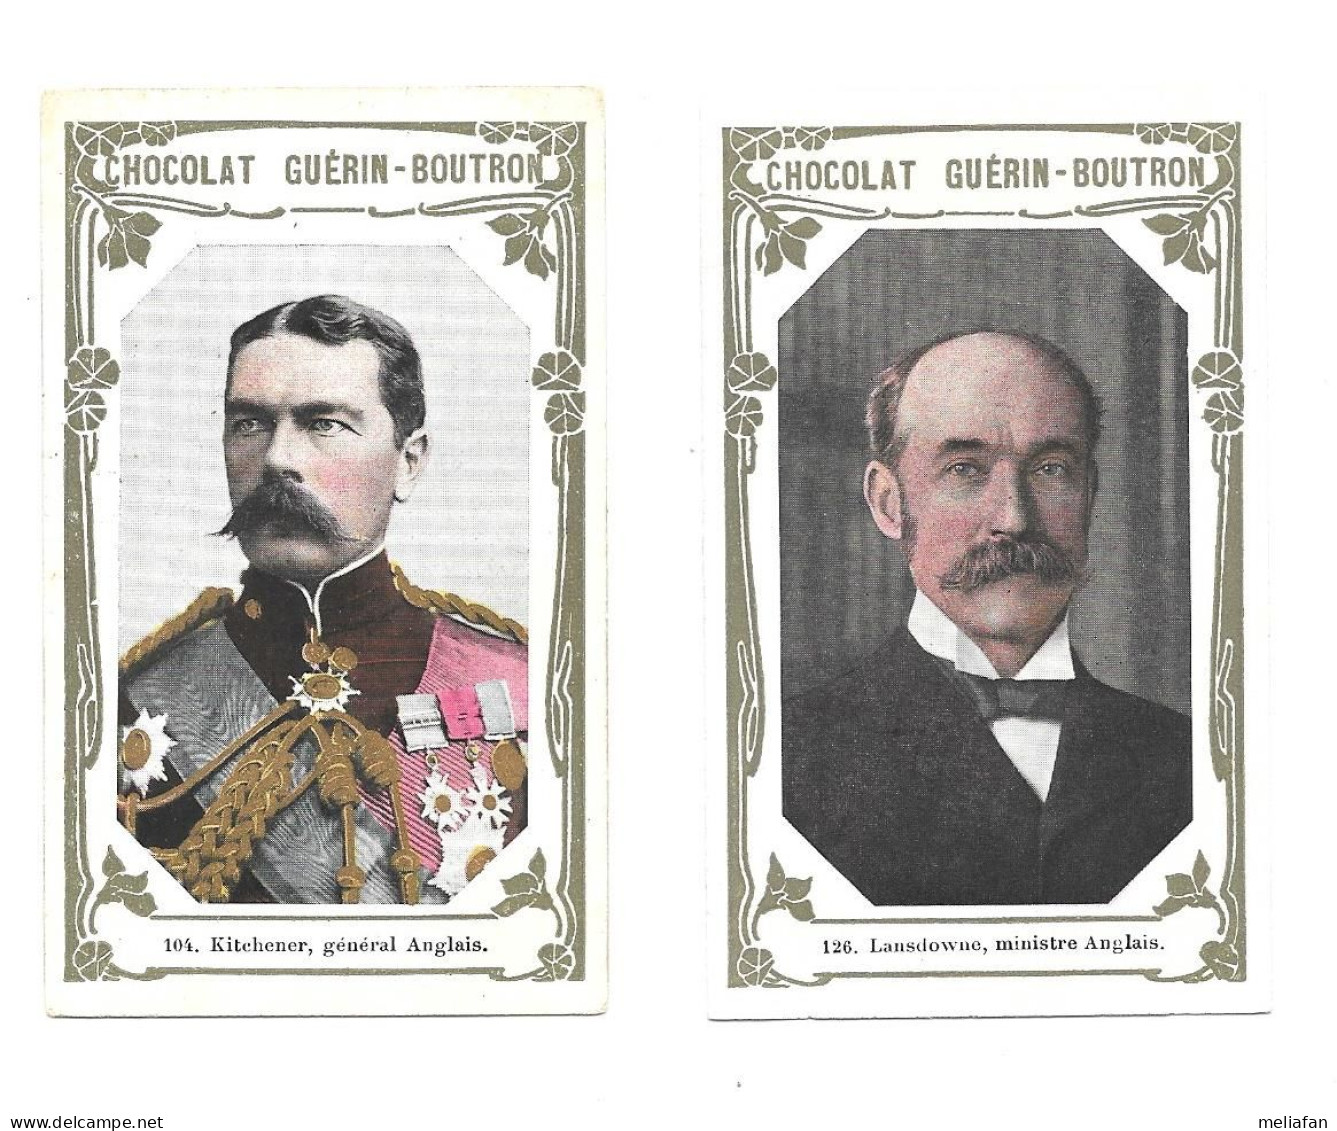 BW49 - GUERIN BOUTRON CHOCOLATE CARDS - LORD KITCHENER - LASDOWNE PRIME MINISTER - Guerin Boutron